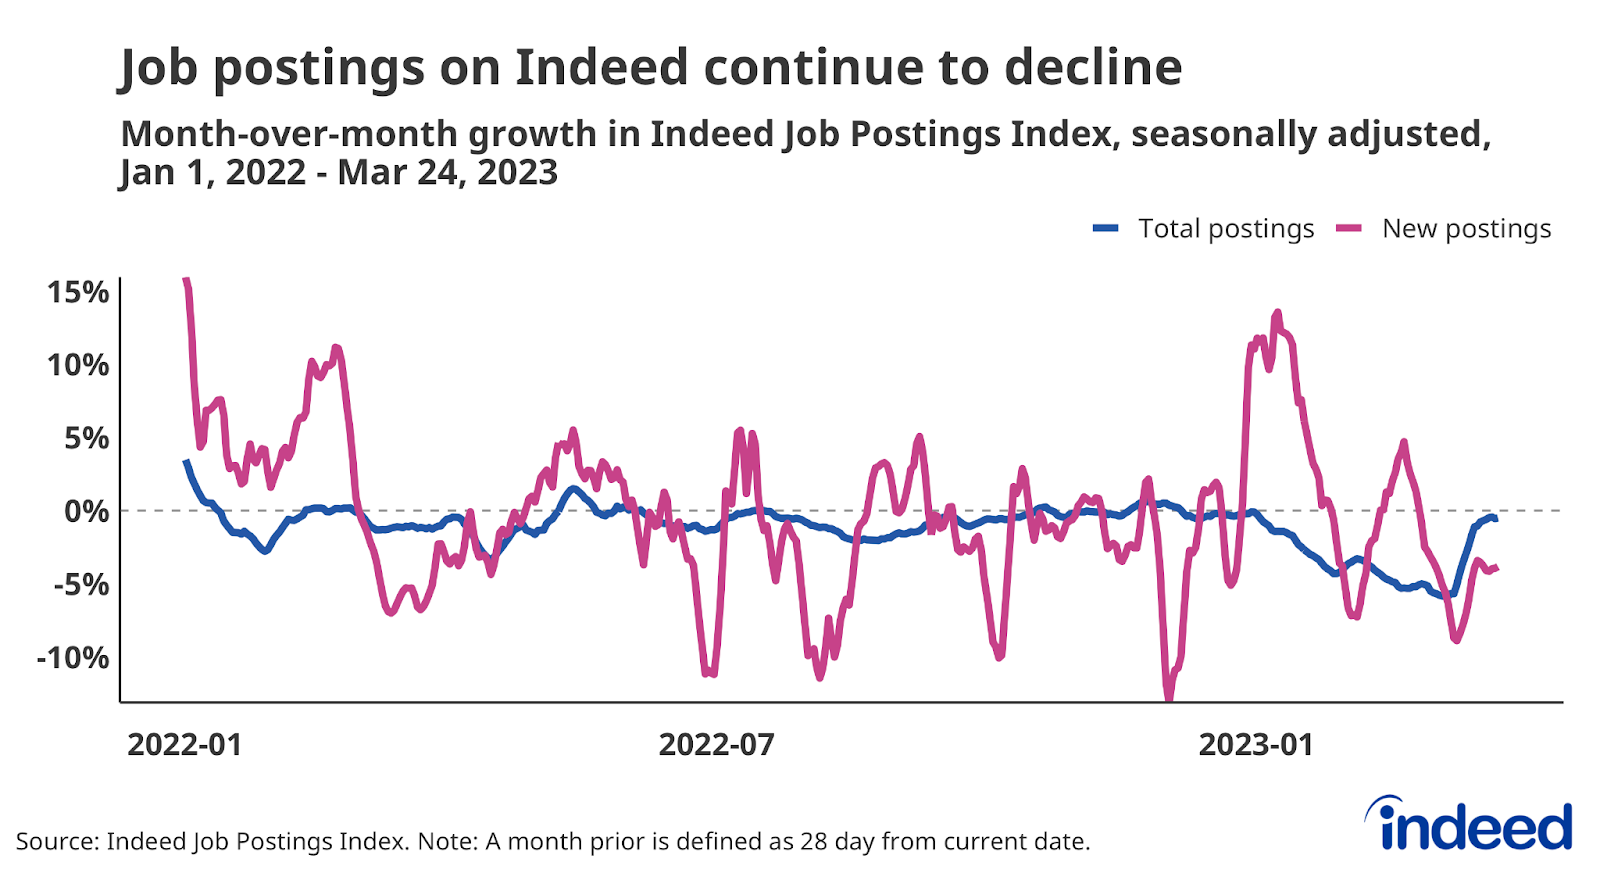 Line graph titled "Job postings on Indeed are down from a month prior” with a vertical axis going from -10% to 15%.